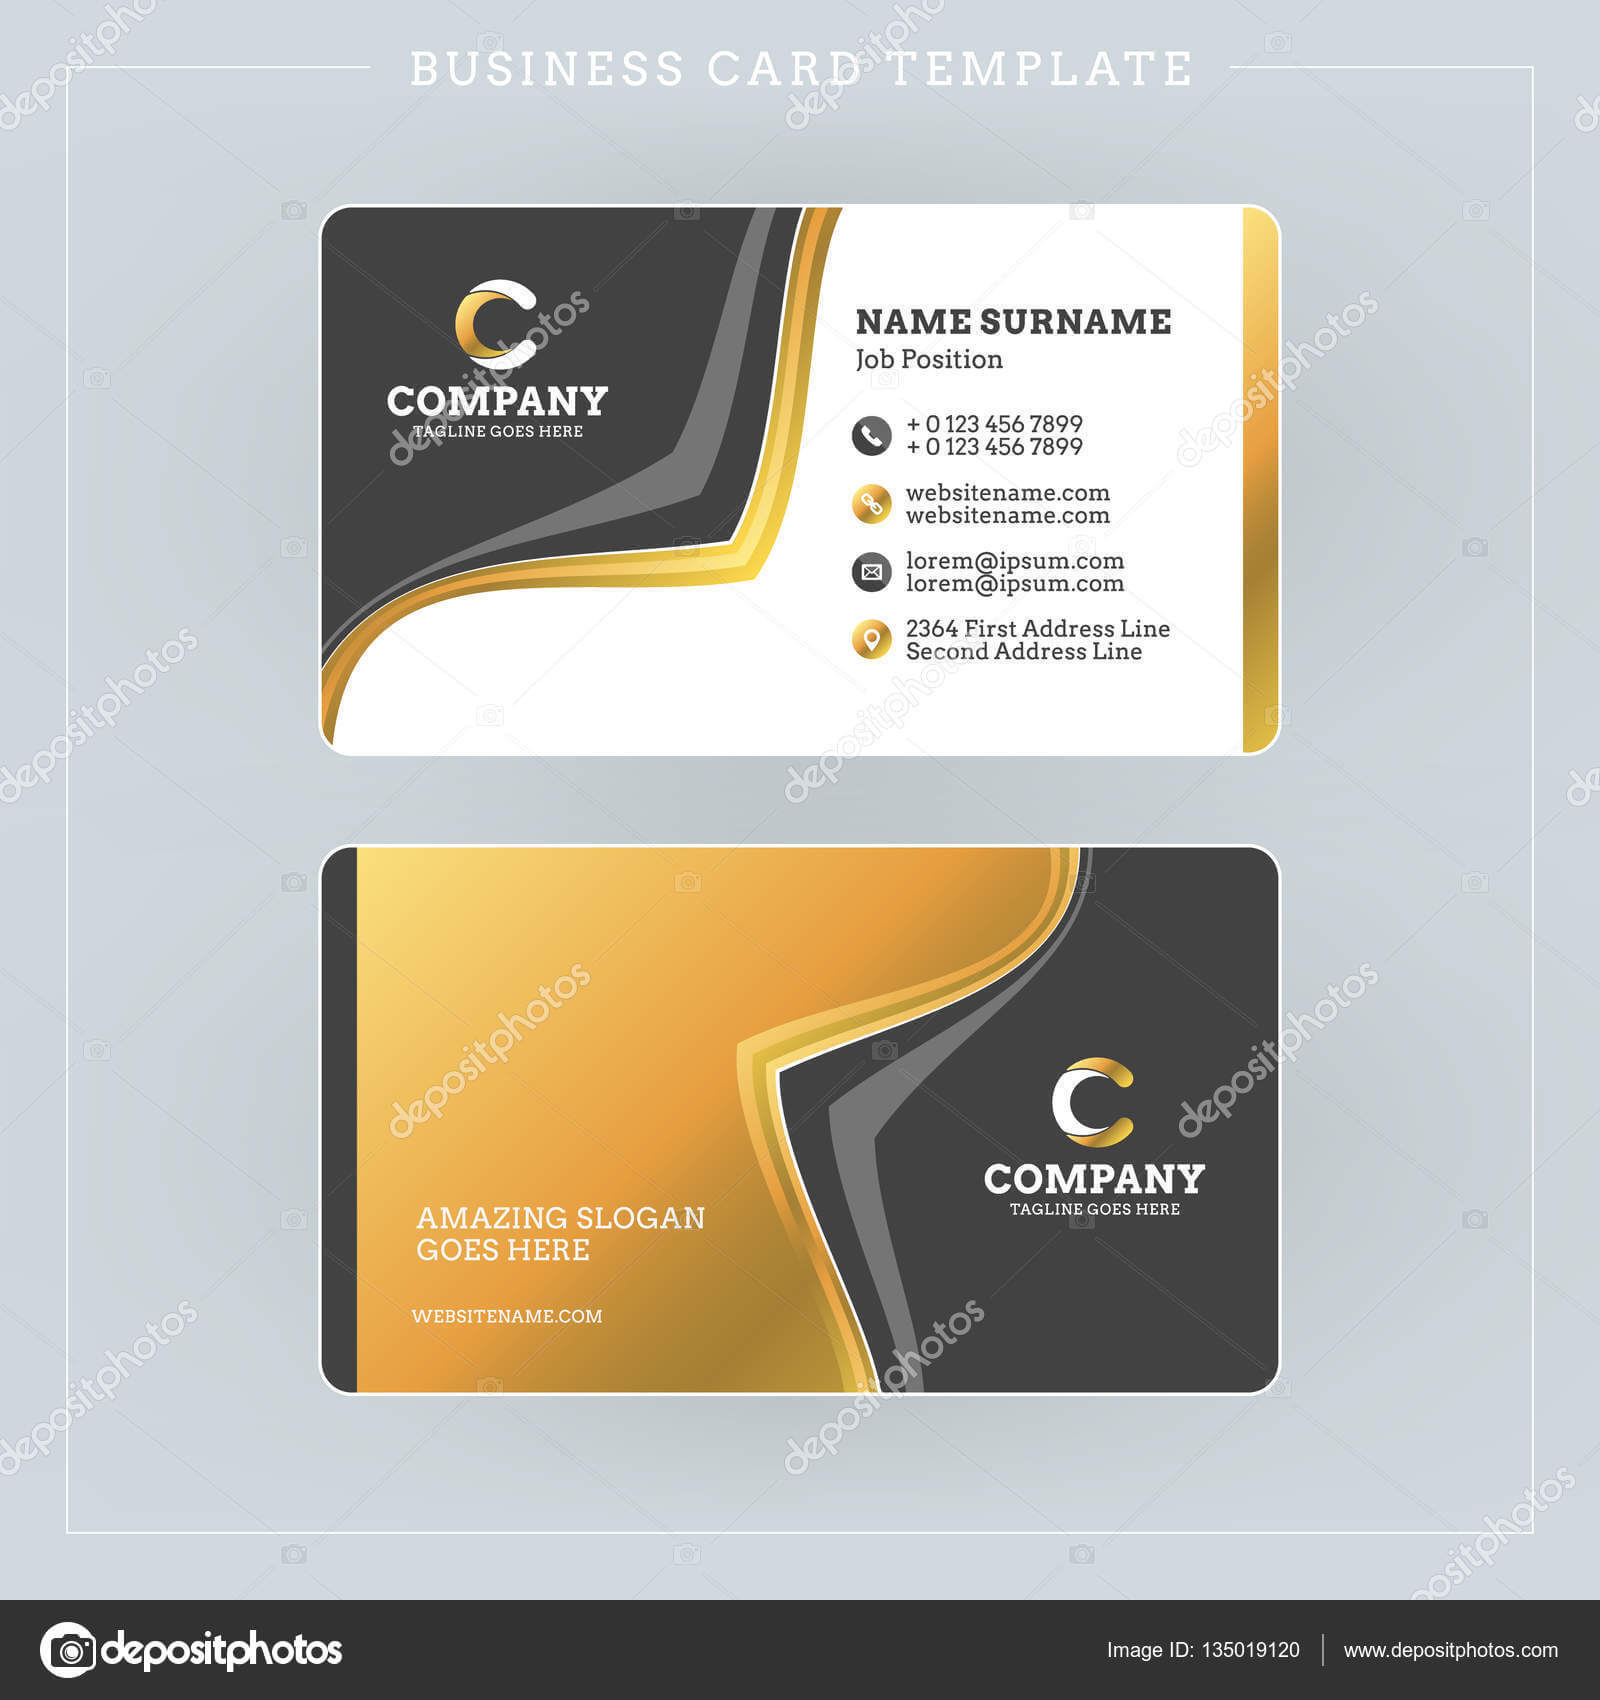 011 Template Ideas Double Sided Business Card Depositphotos With 2 Sided Business Card Template Word